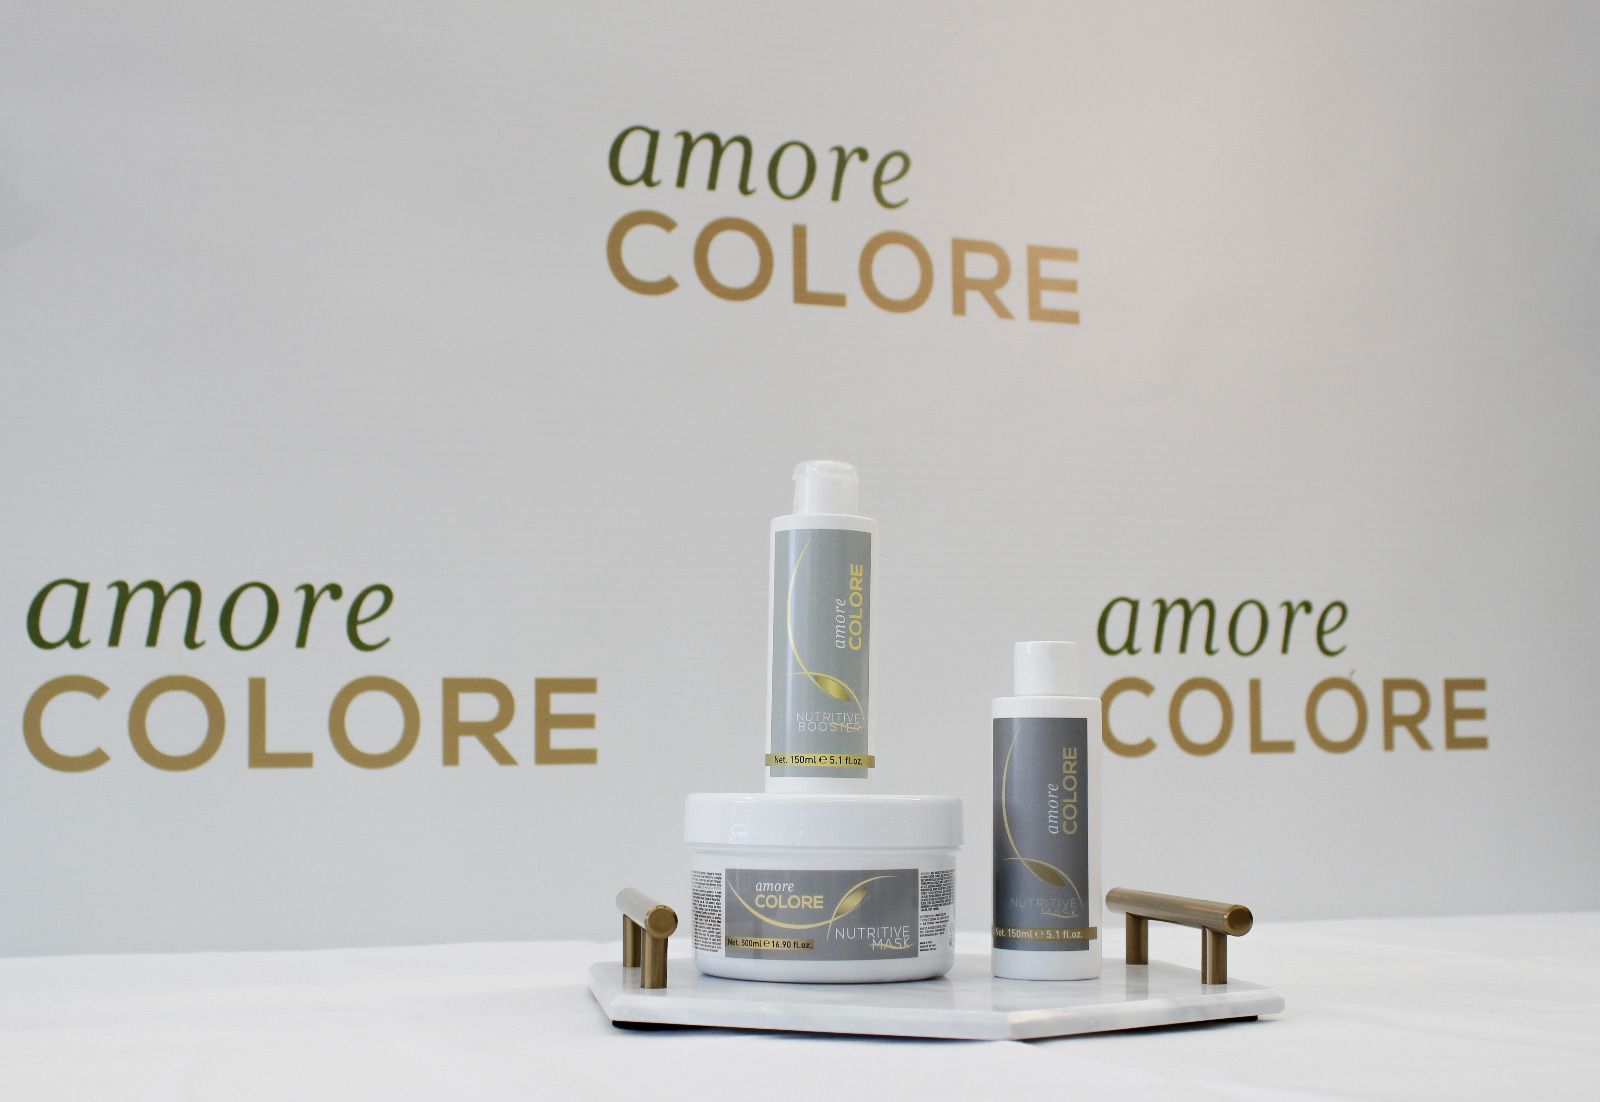 Amore Colore Nutritive Booster